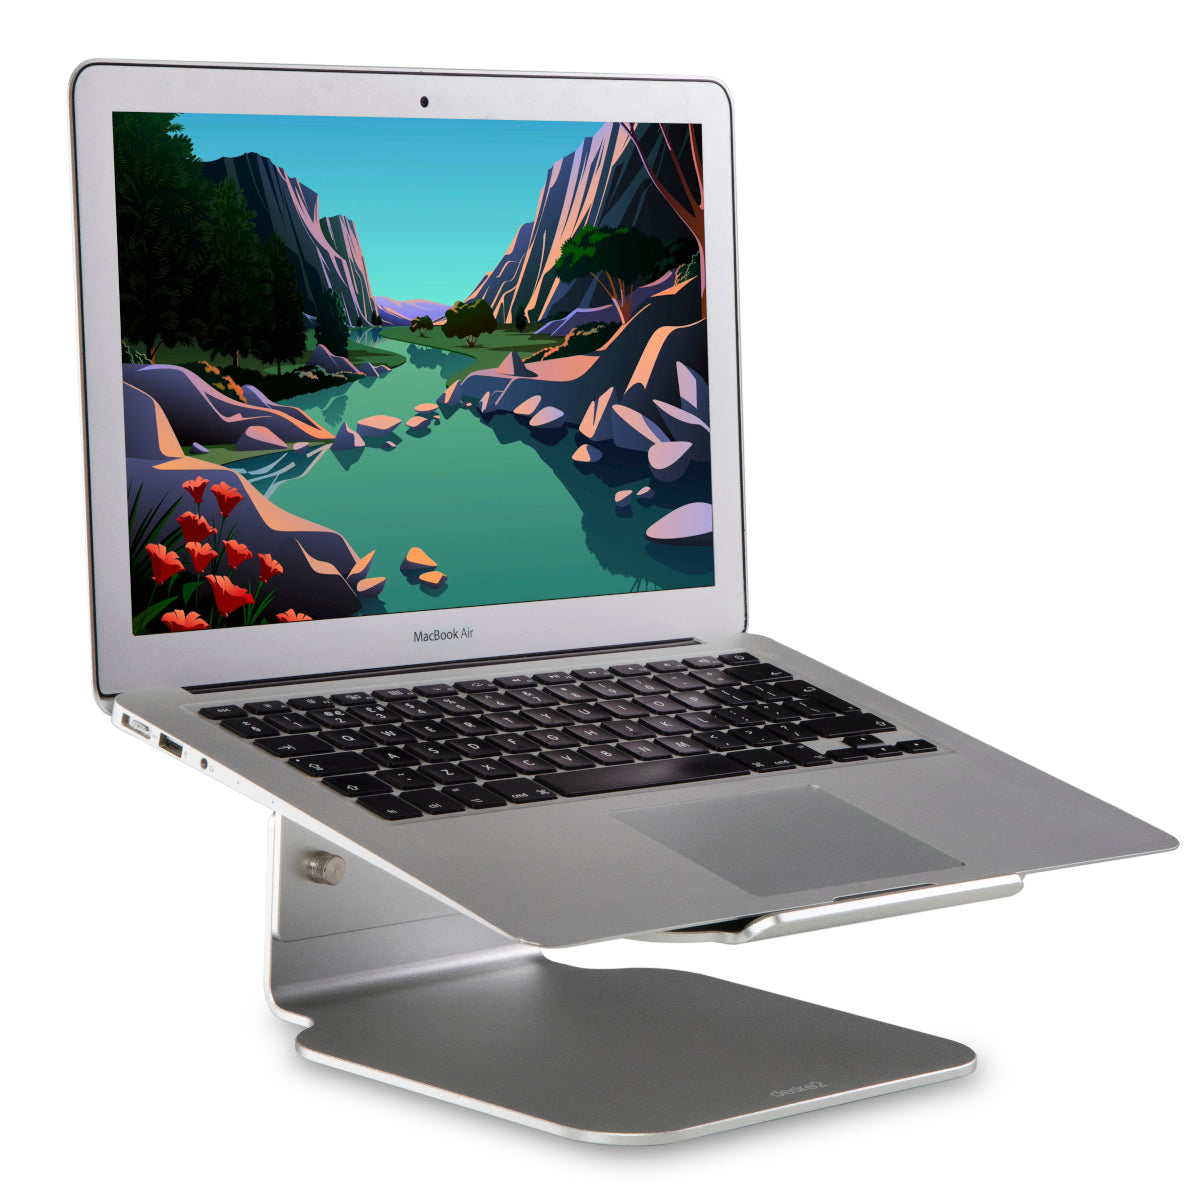 Solid aluminium laptop stand with 'Desire2' logo on it.  An Apple Macbook air laptop is on the stand with the screen open and the 'big sur' background showing.  